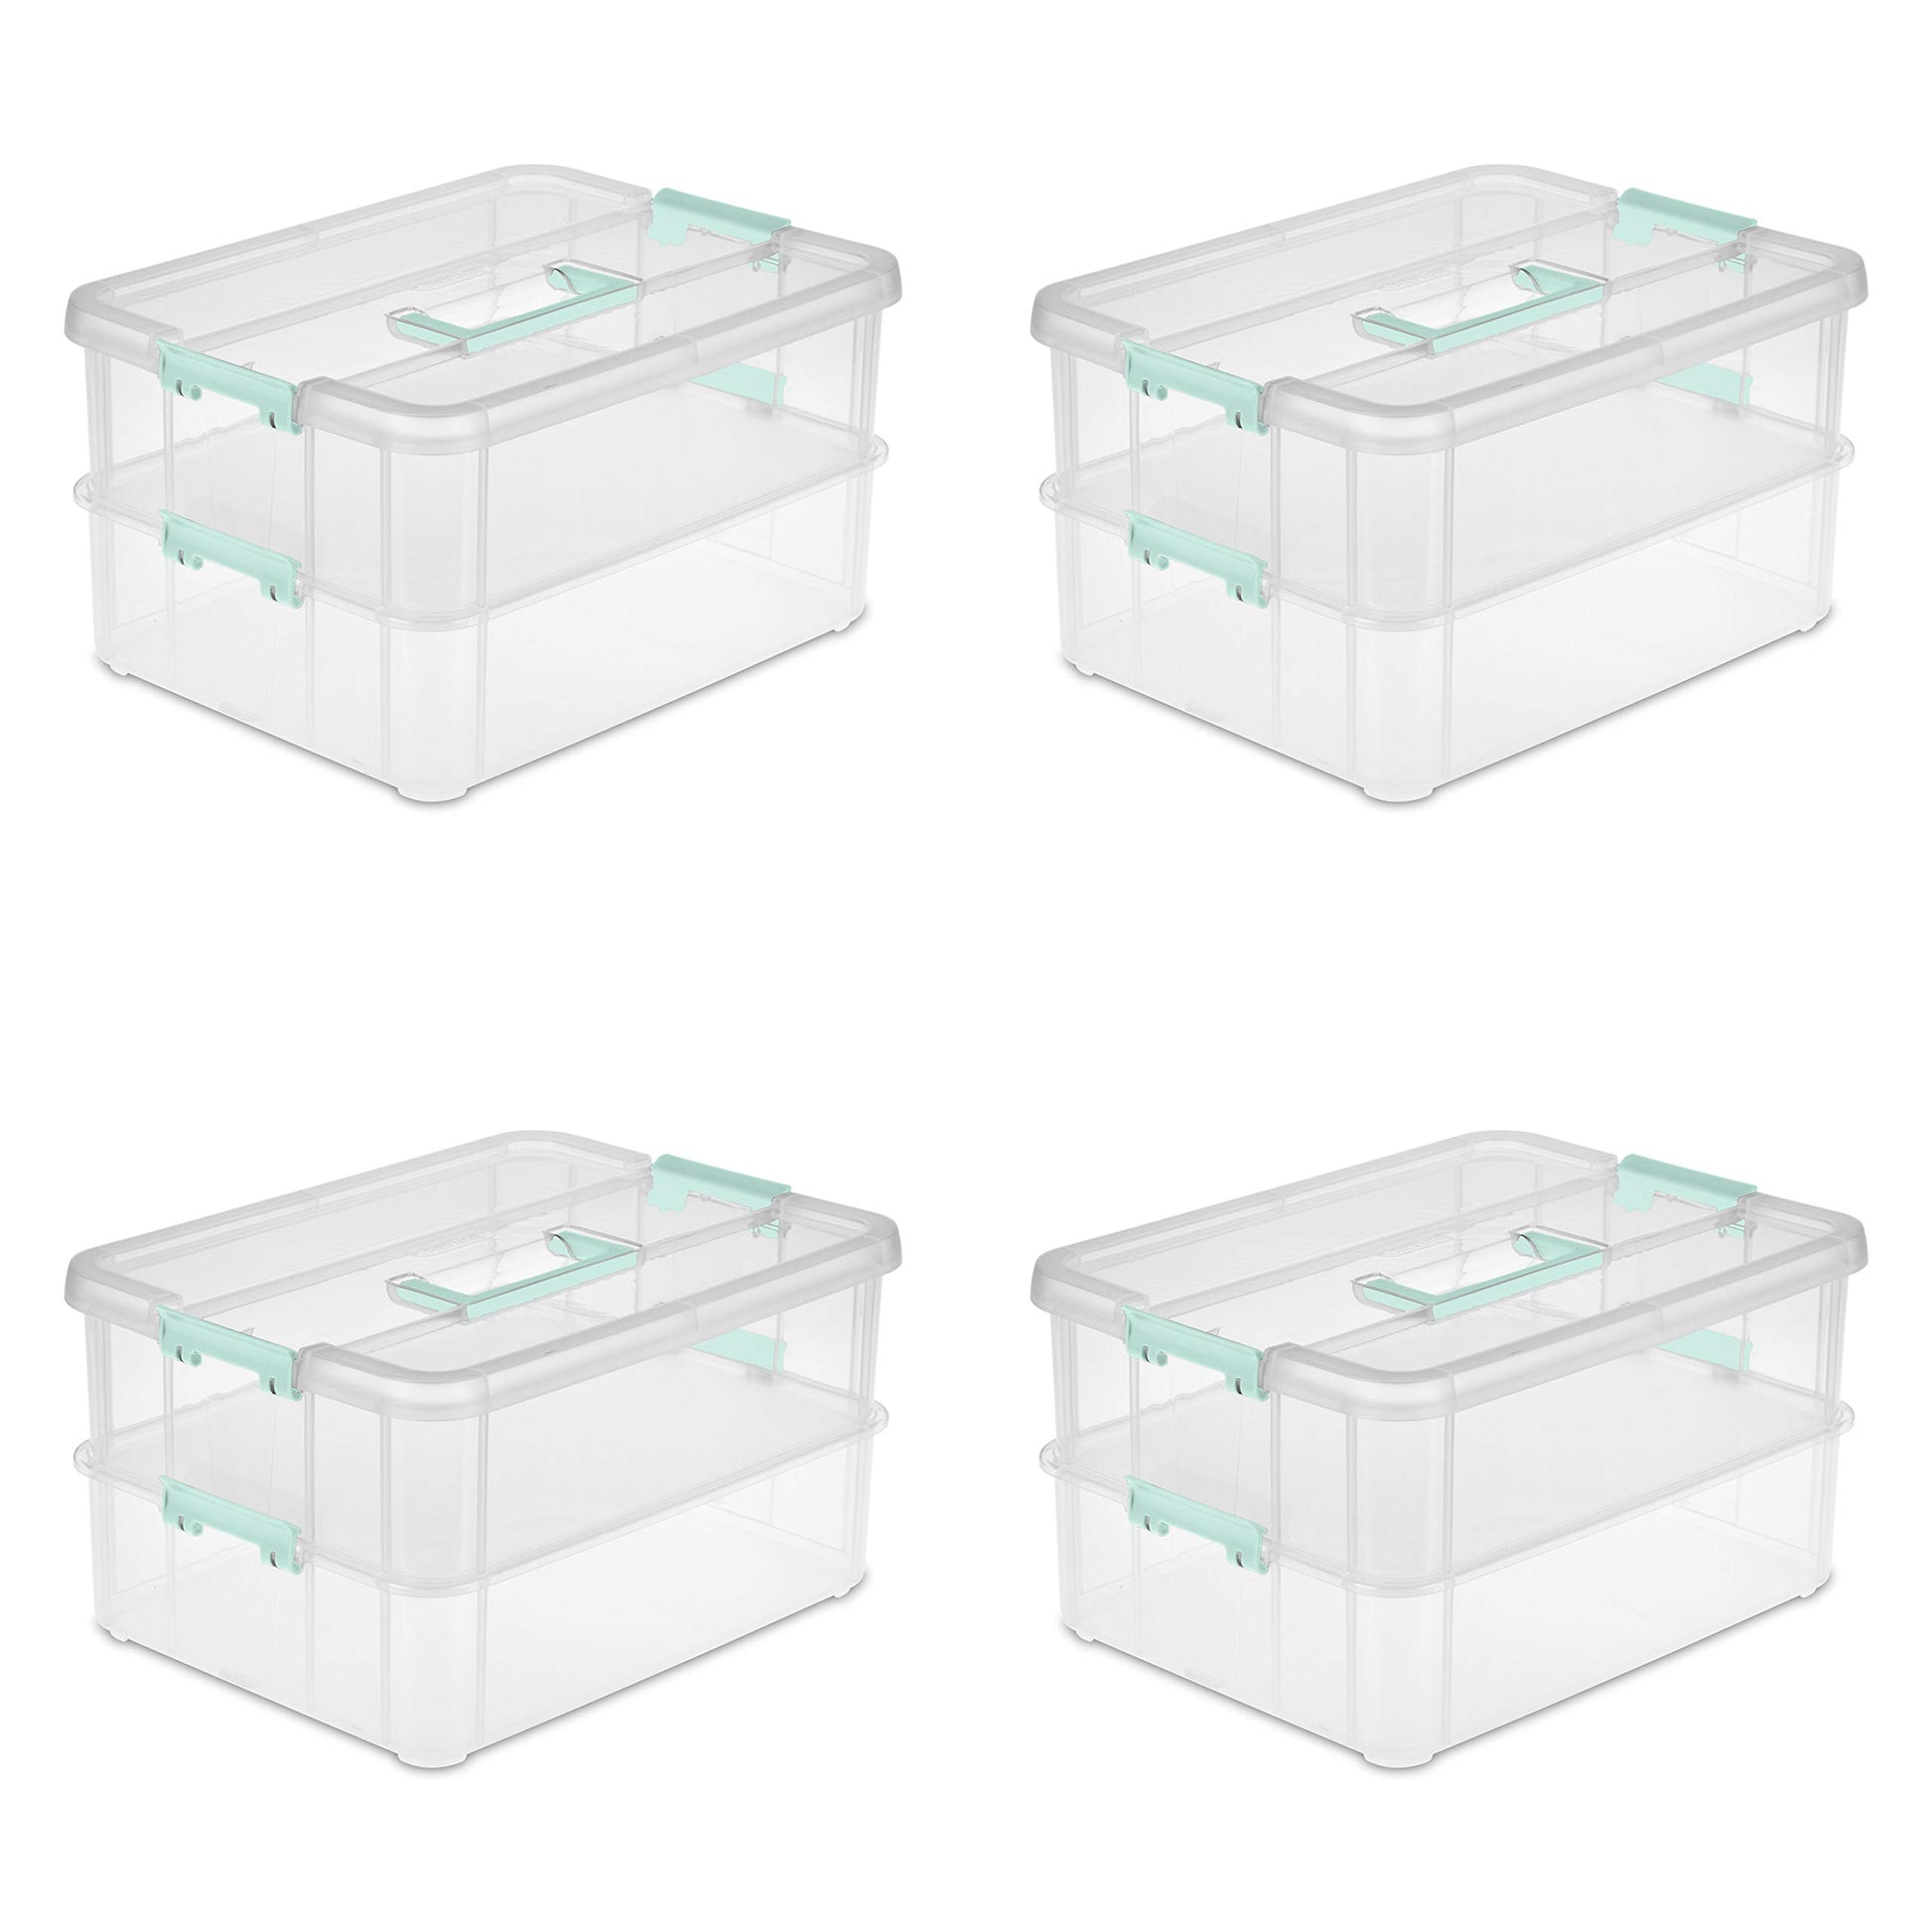 Sterilite Stack & Carry 2 Layer Box Small Storage, Clear, Pack of 4